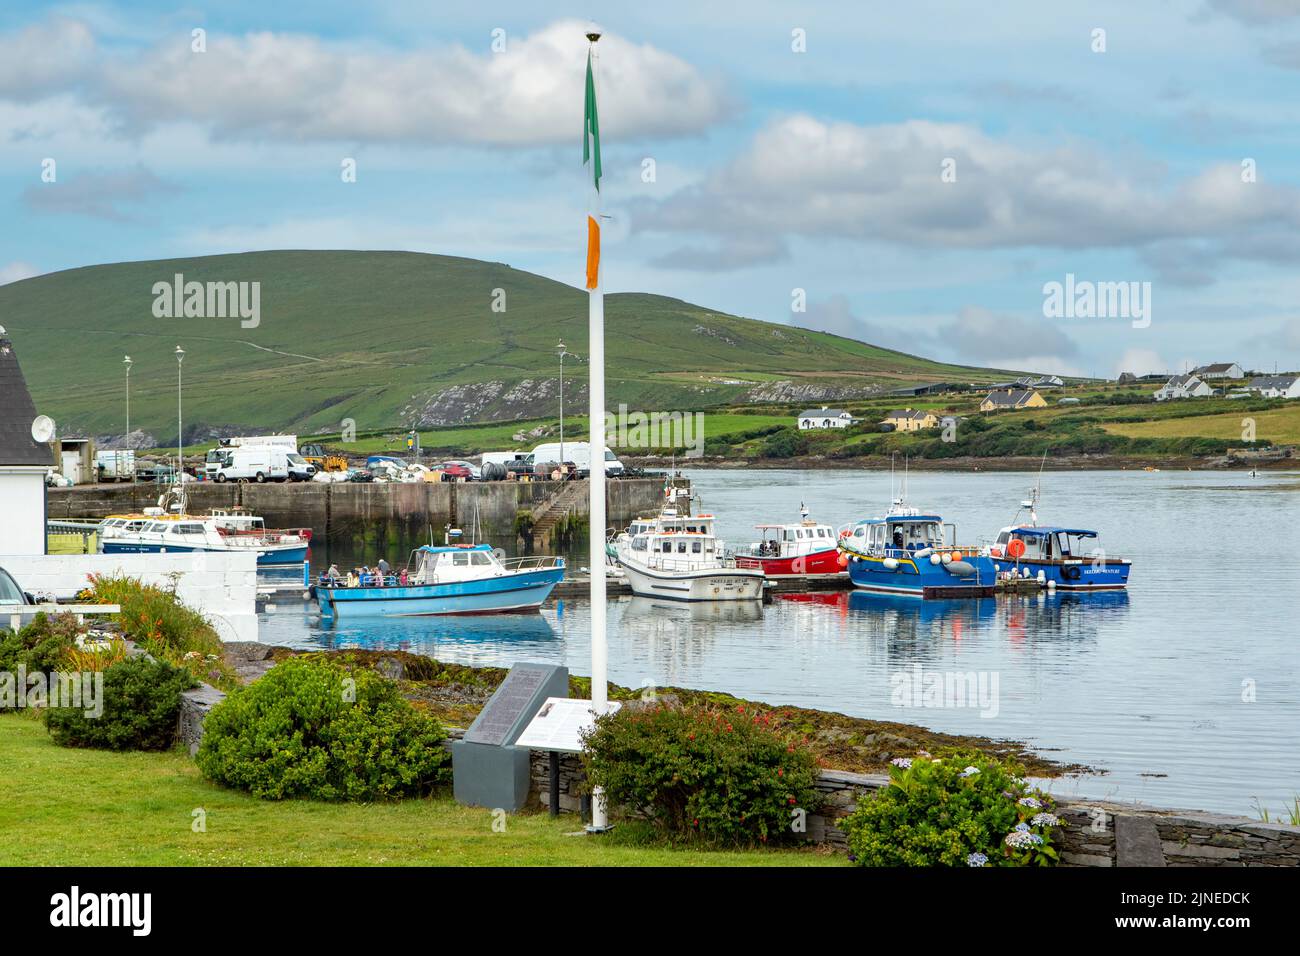 Hafen in Portmagee, Ring of Kerry, Co. Kerry, Irland Stockfoto